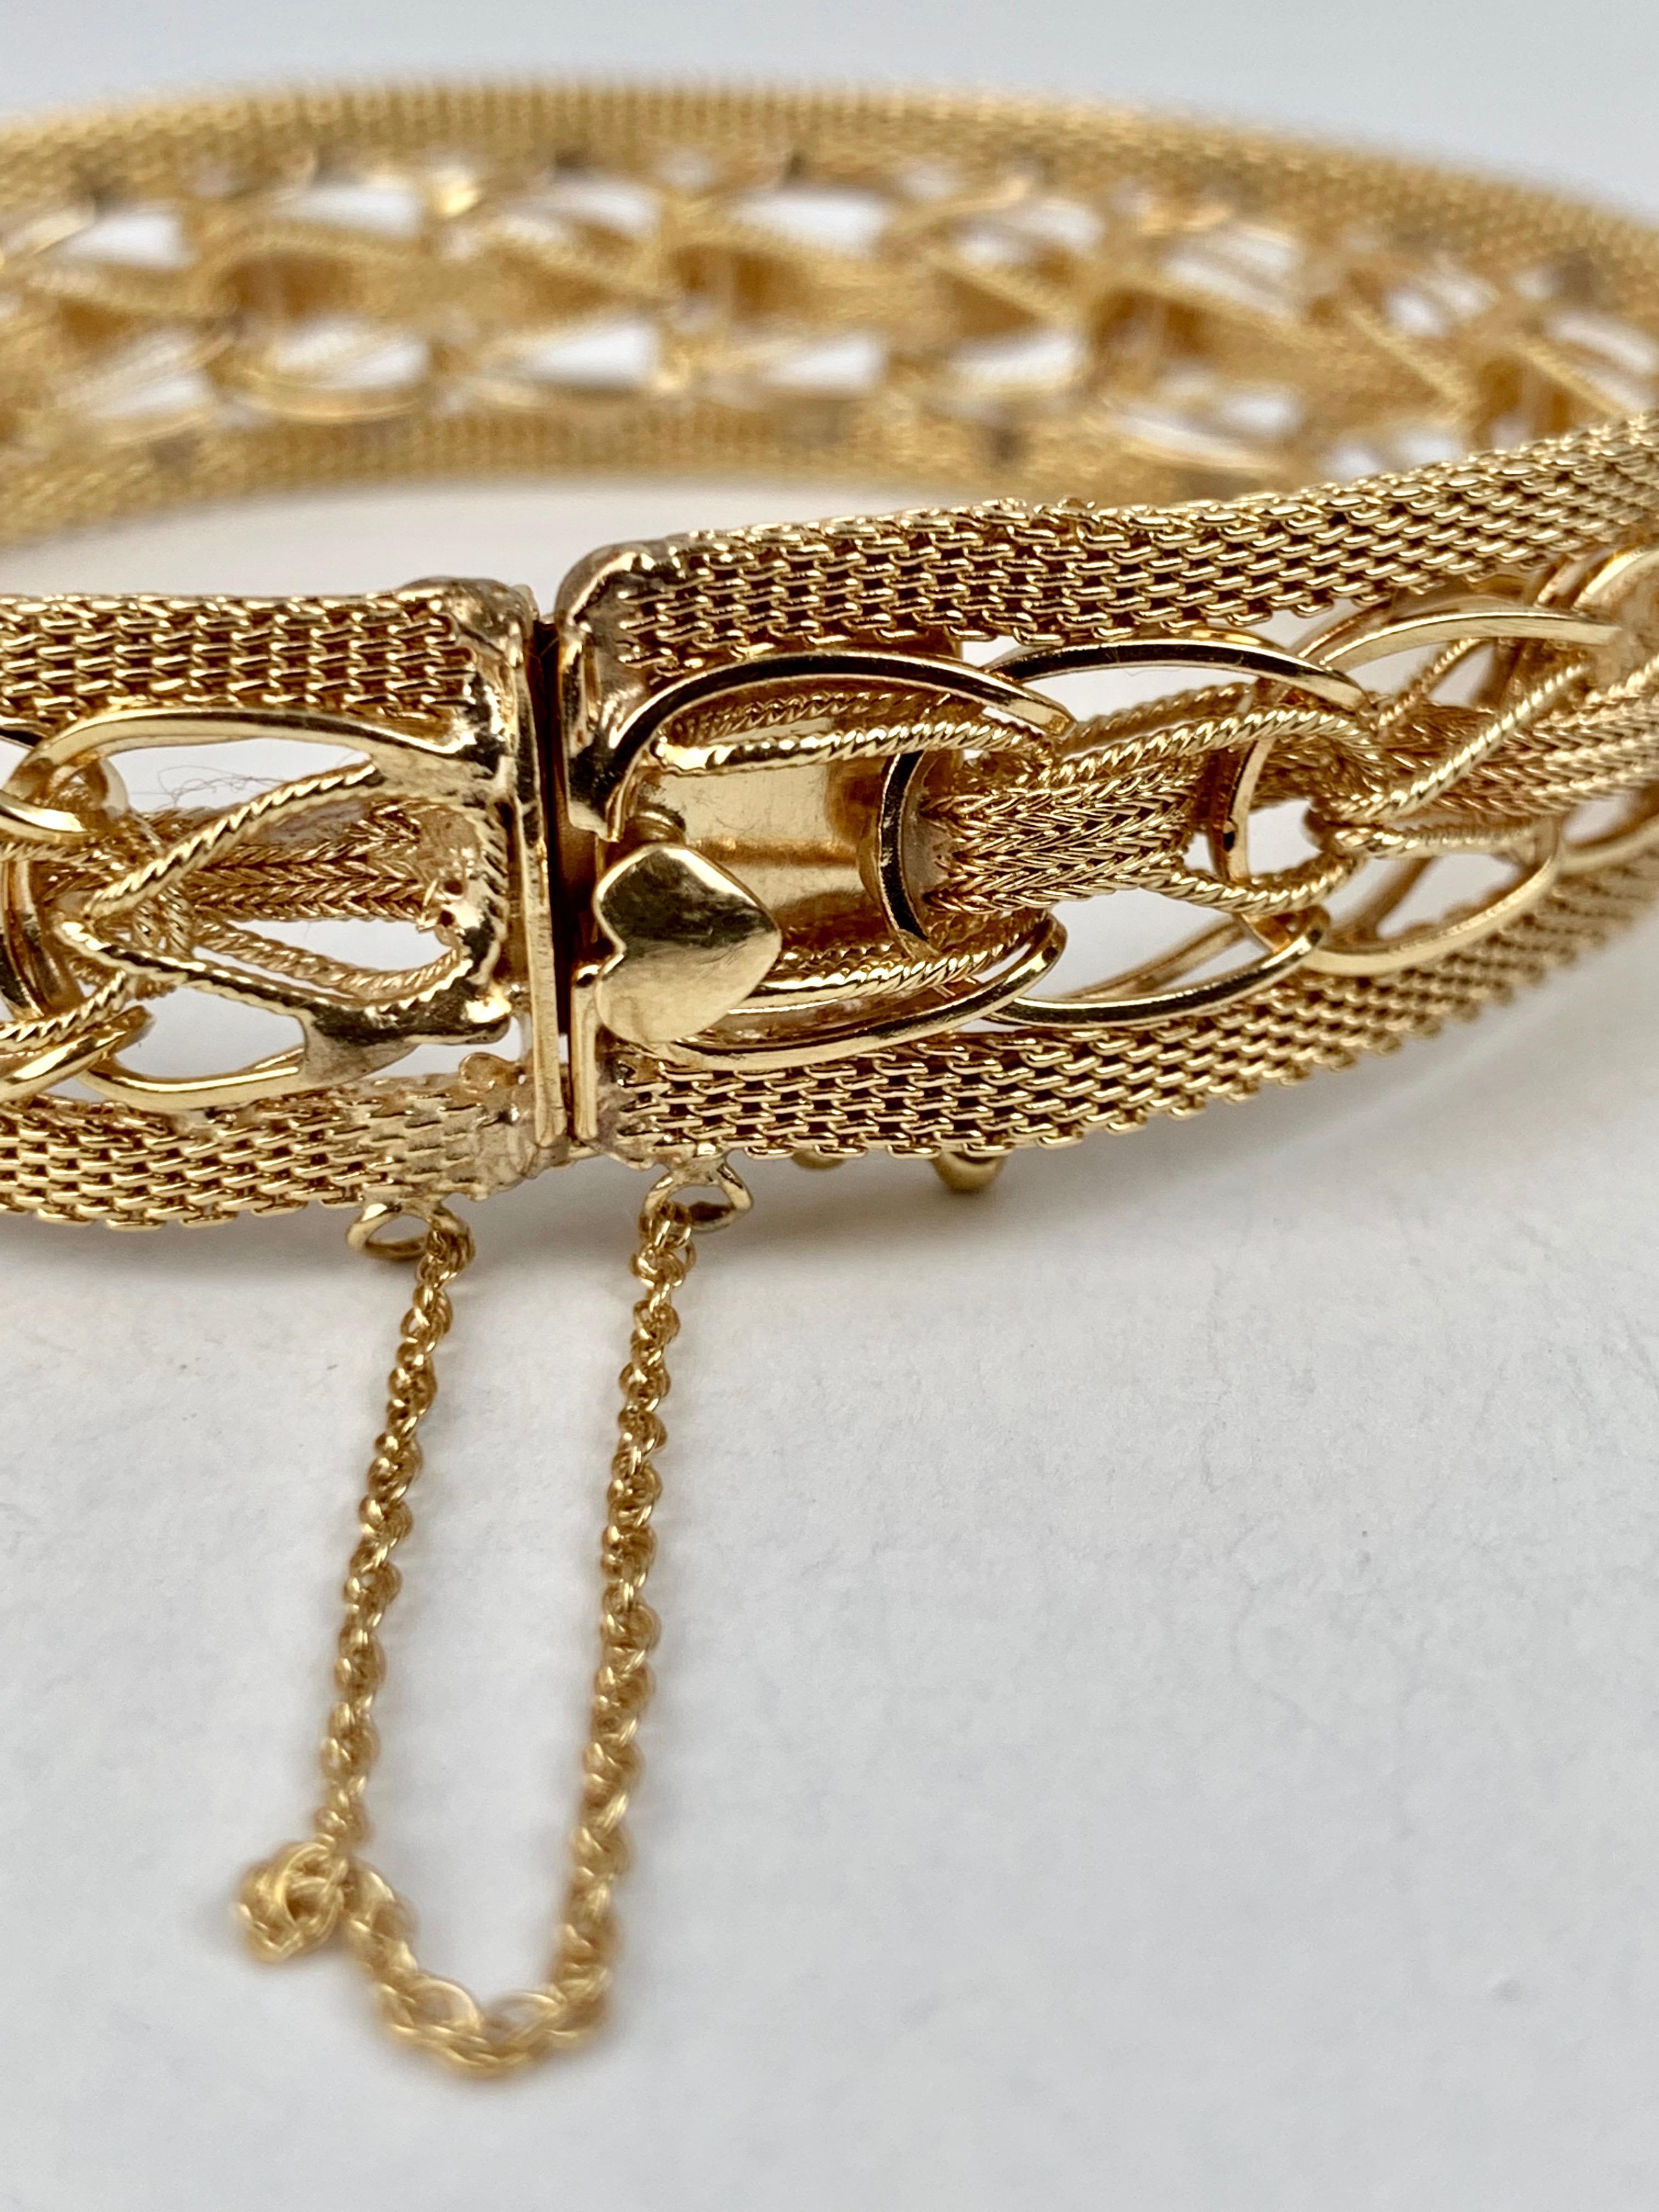 Gold Mesh Bracelet with a Heart Shaped Thumb Latch-14 karat y.g.  In Good Condition For Sale In West Palm Beach, FL